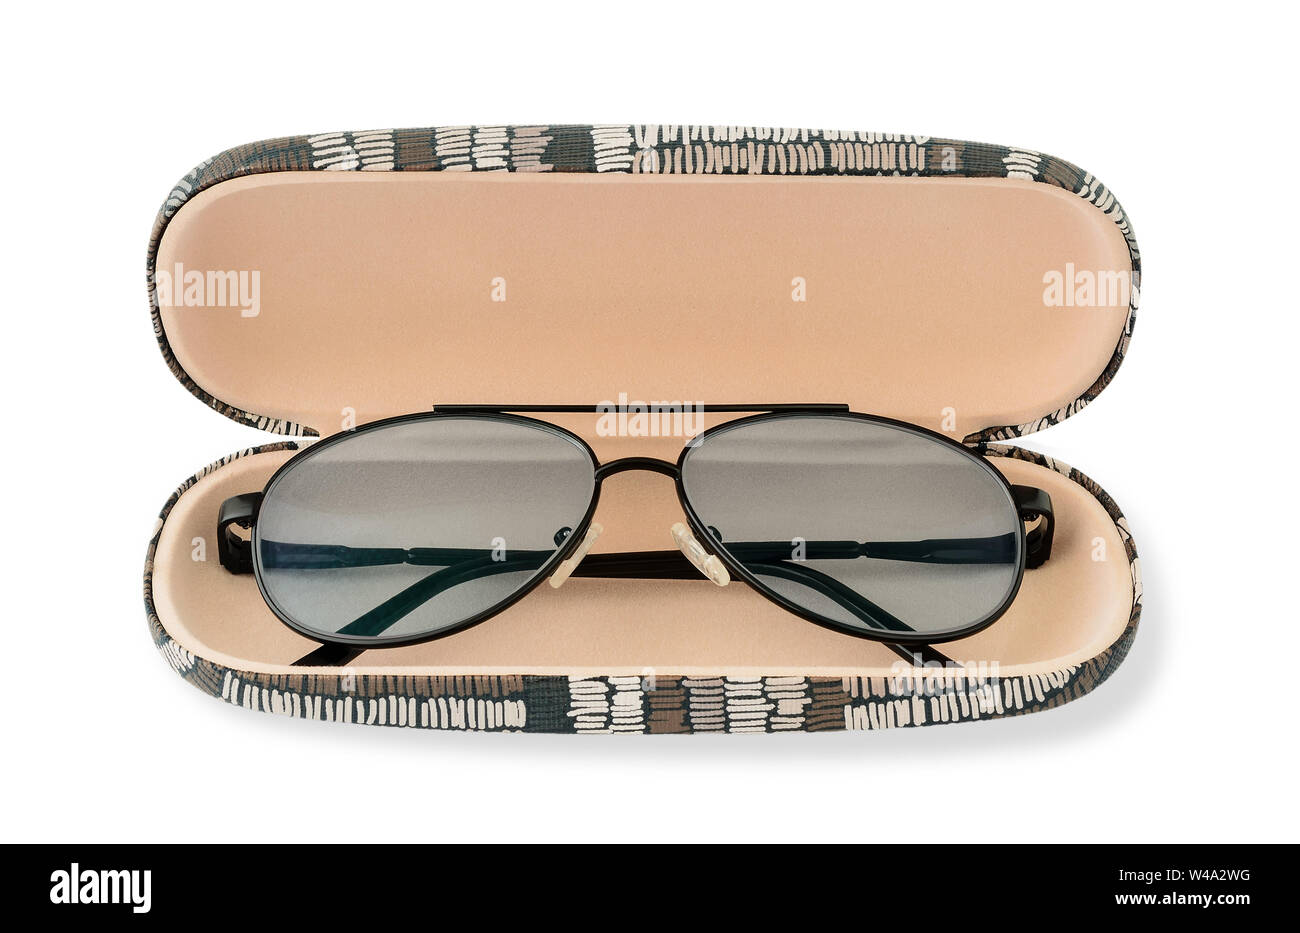 Glasses for sight with a polarized lenses in a glasses case. Polarized lenses eye glasses for reading and computer work. Myopia, hyperopia and vision Stock Photo